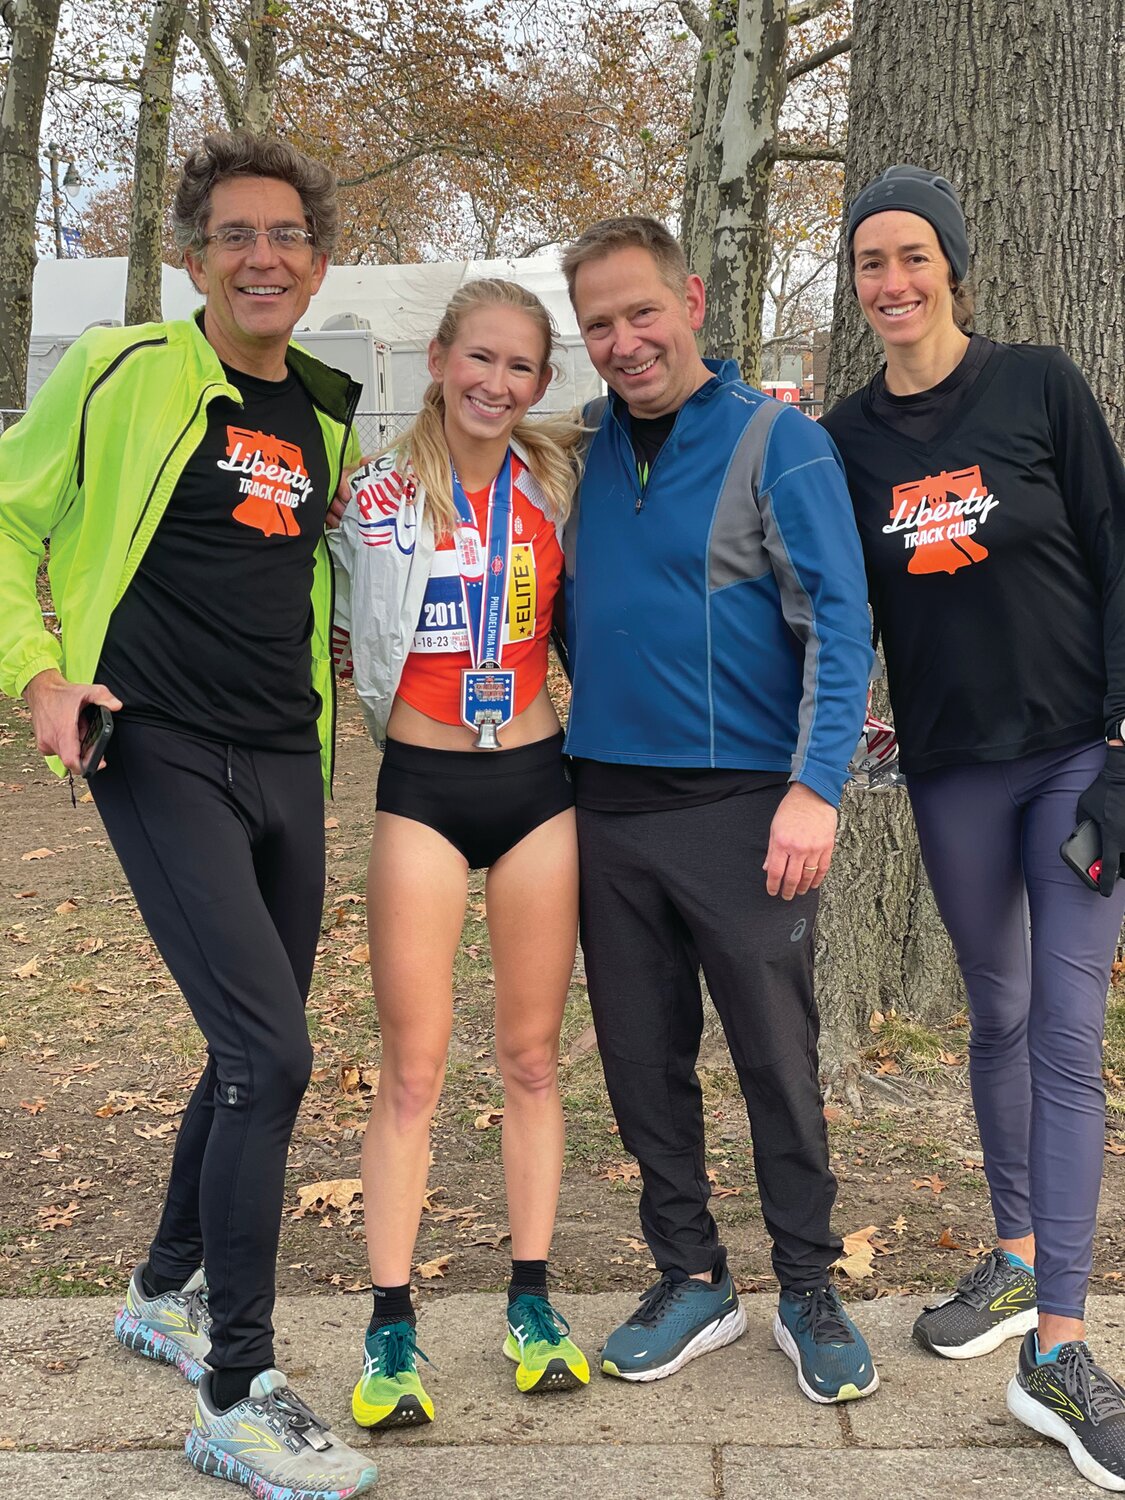 At the 2023 Philadelphia Half-Marathon, Veronica Eder, second from left, celebrates her strong finish with her dad, Jim, third from left, and family friends Matt Costello, left, and Tracey Sawyer, right.